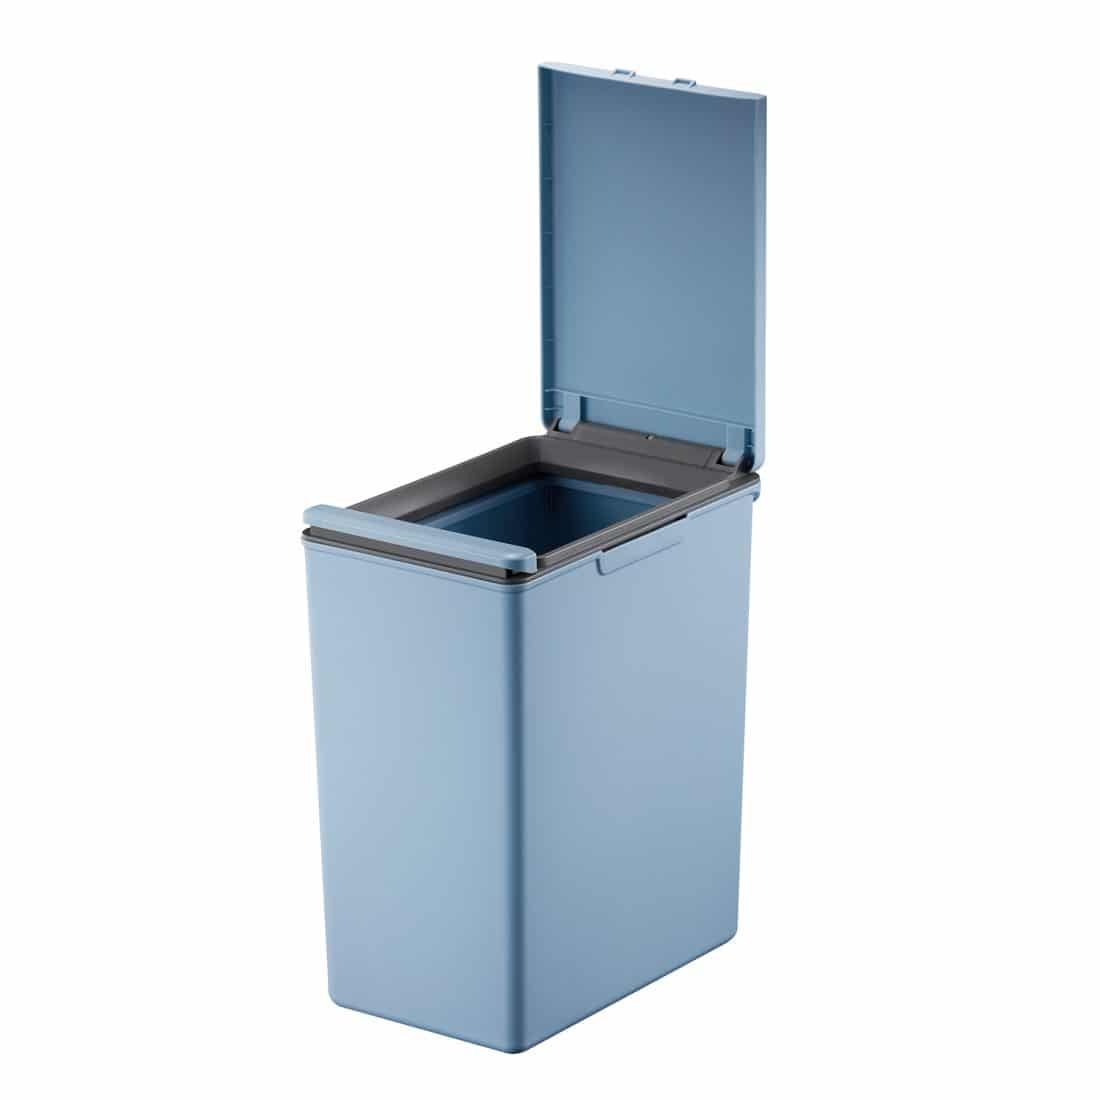 Morandi Touch Bin 20L Separate waste bin, connectable for recycling Blue